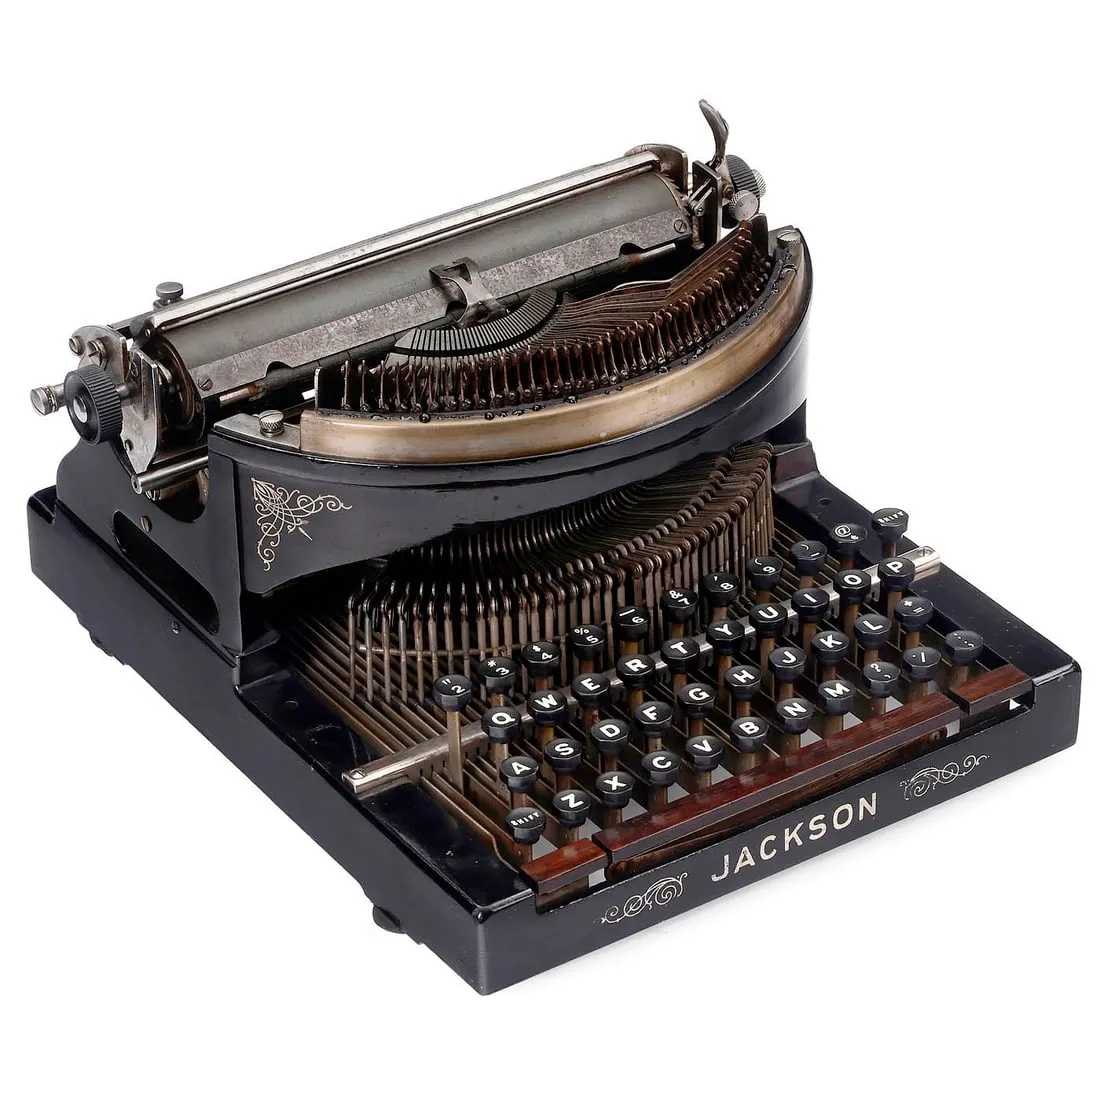 Jackson Type I typewriter, which sold for €22,000 ($23,820, or $29,485 with buyer’s premium) at Breker.